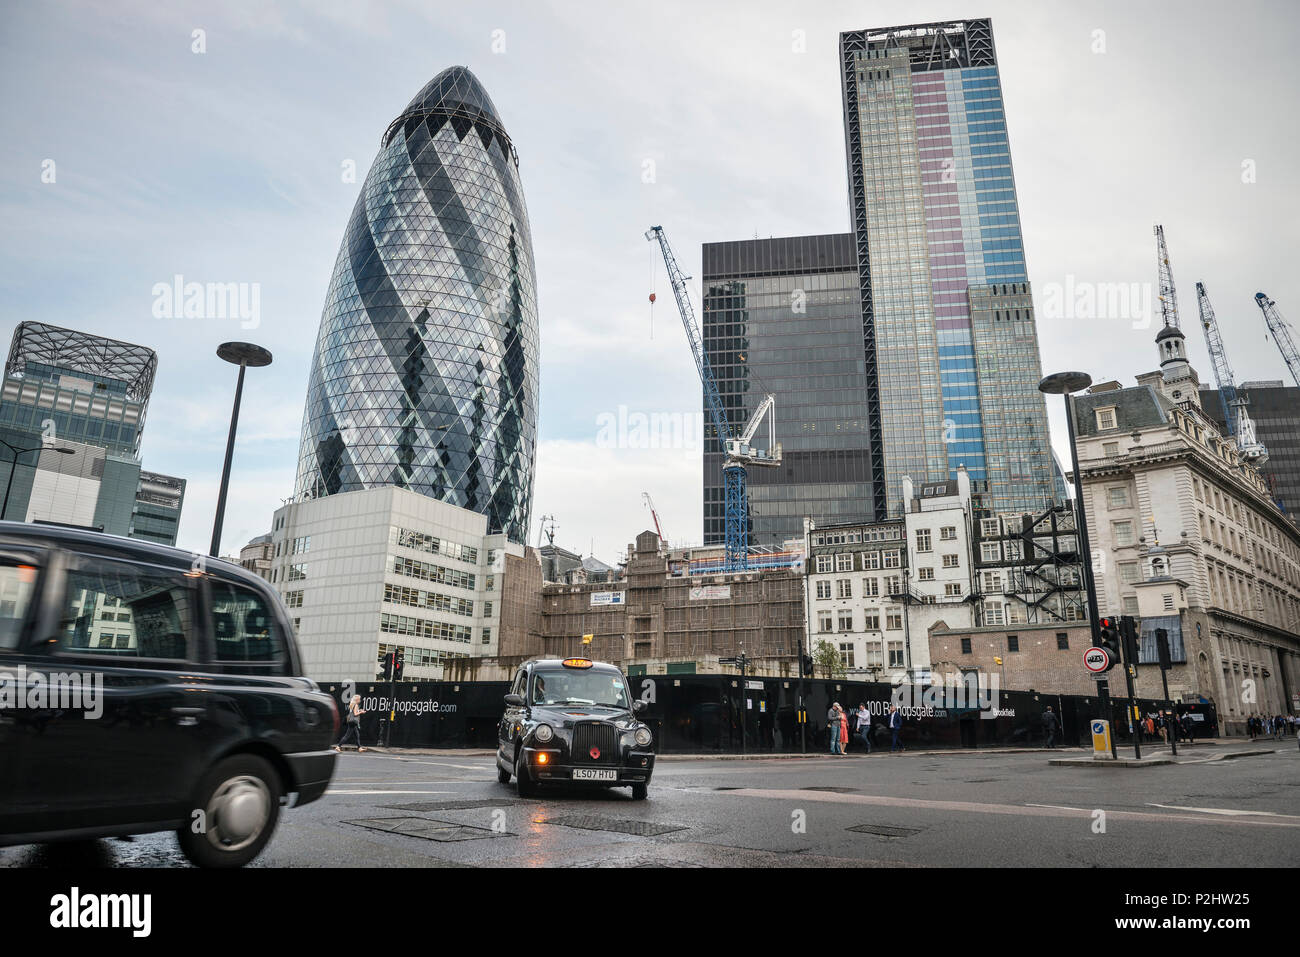 the Gherkin' by Norman Foster with typical London cab, Liverpool Street, City of London, England, United Kingdom, Europe Stock Photo